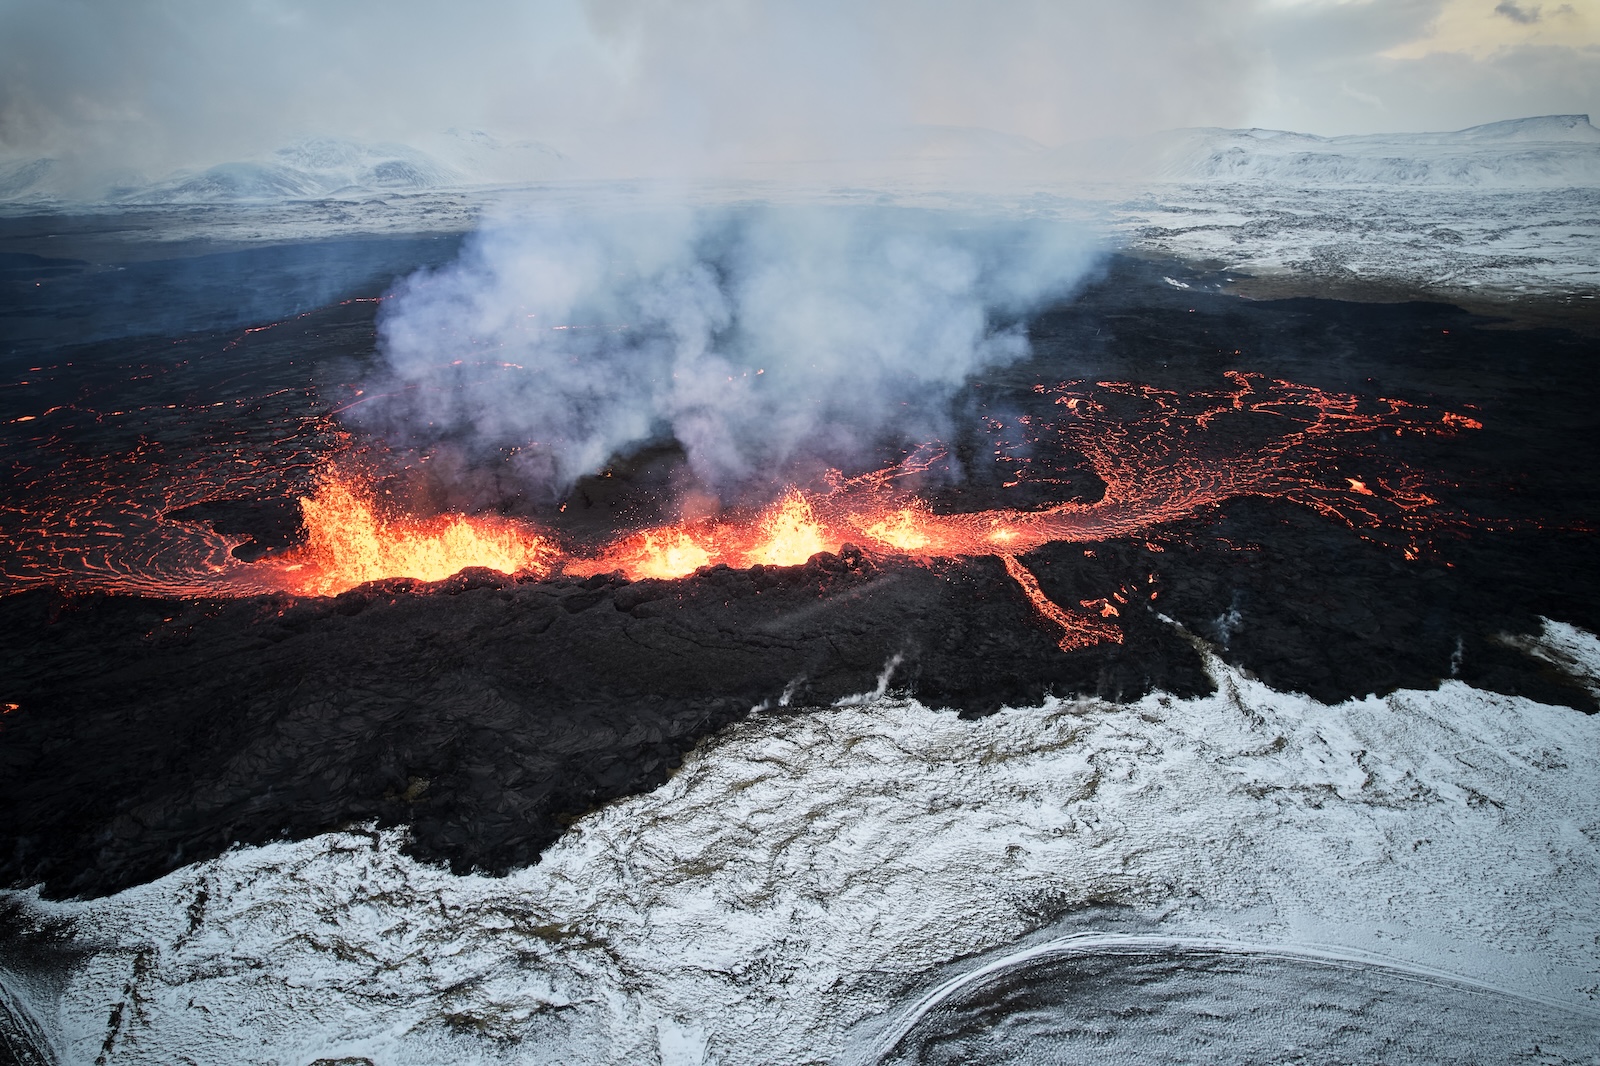 epa11037727 An aerial view taken with a drone shows lava and smoke spewing from a volcanic fissure during an eruption, near the town of Grindavik, in the Reykjanes peninsula, southwestern Iceland, 19 December 2023. The Icelandic Meteorological Office (IMO) announced the start of a volcanic fissure eruption near the Sundhnuka crater, north-east of Grindavik, on the night of 18 December, following weeks of intense earthquake activity in the area. The power and seismic activity of the eruption have decreased over time, IMO reported on 19 December, adding that since the eruption began, about 320 earthquakes have been recorded.  EPA/ANTON BRINK